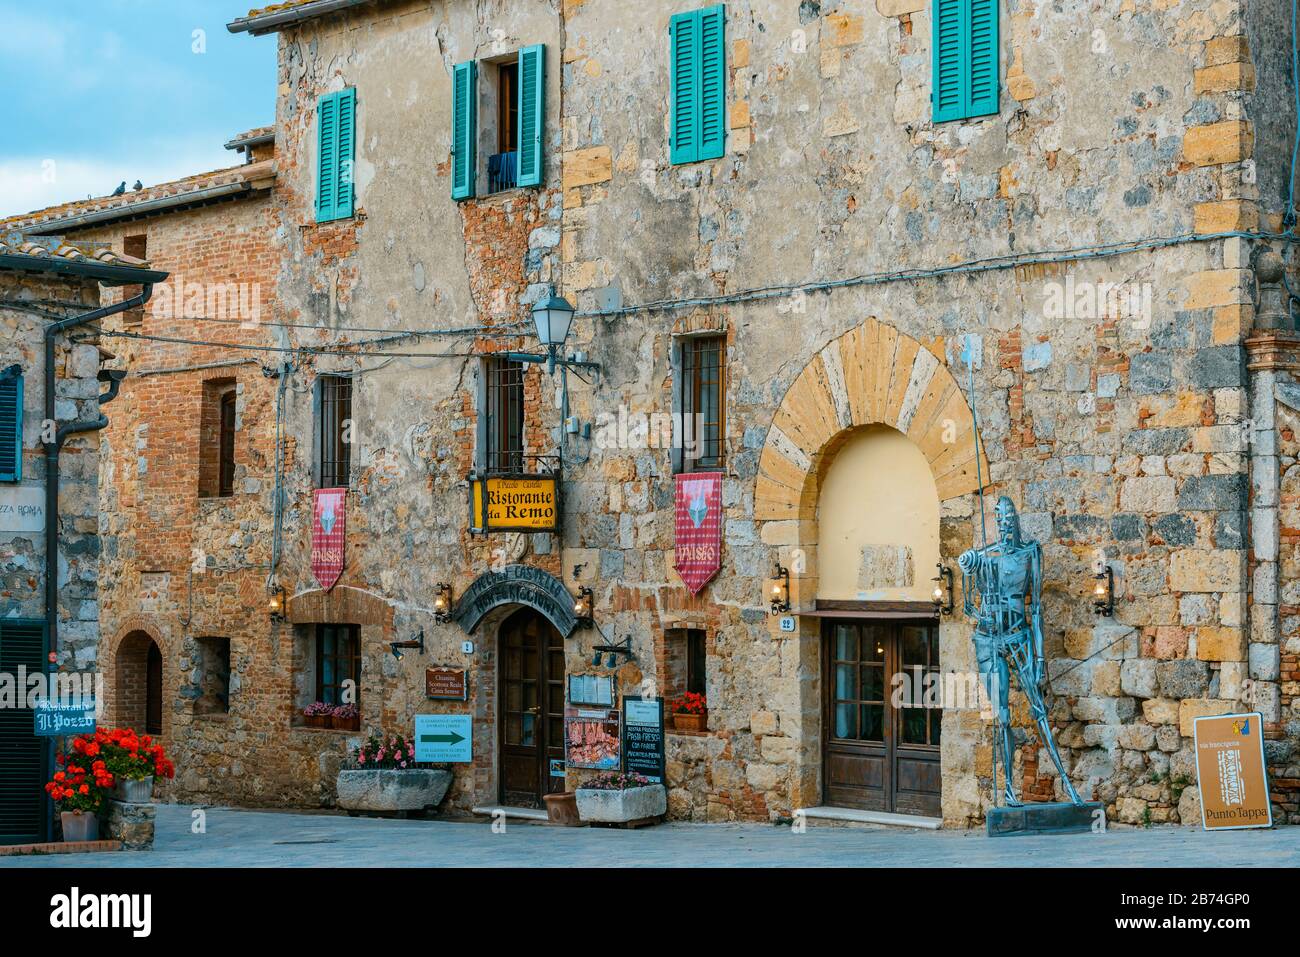 Facade of Museo Monteriggioni in Arme in Piazza Roma, a local history museum housing reproductions of medieval and Renaissance weapons and armour. Stock Photo